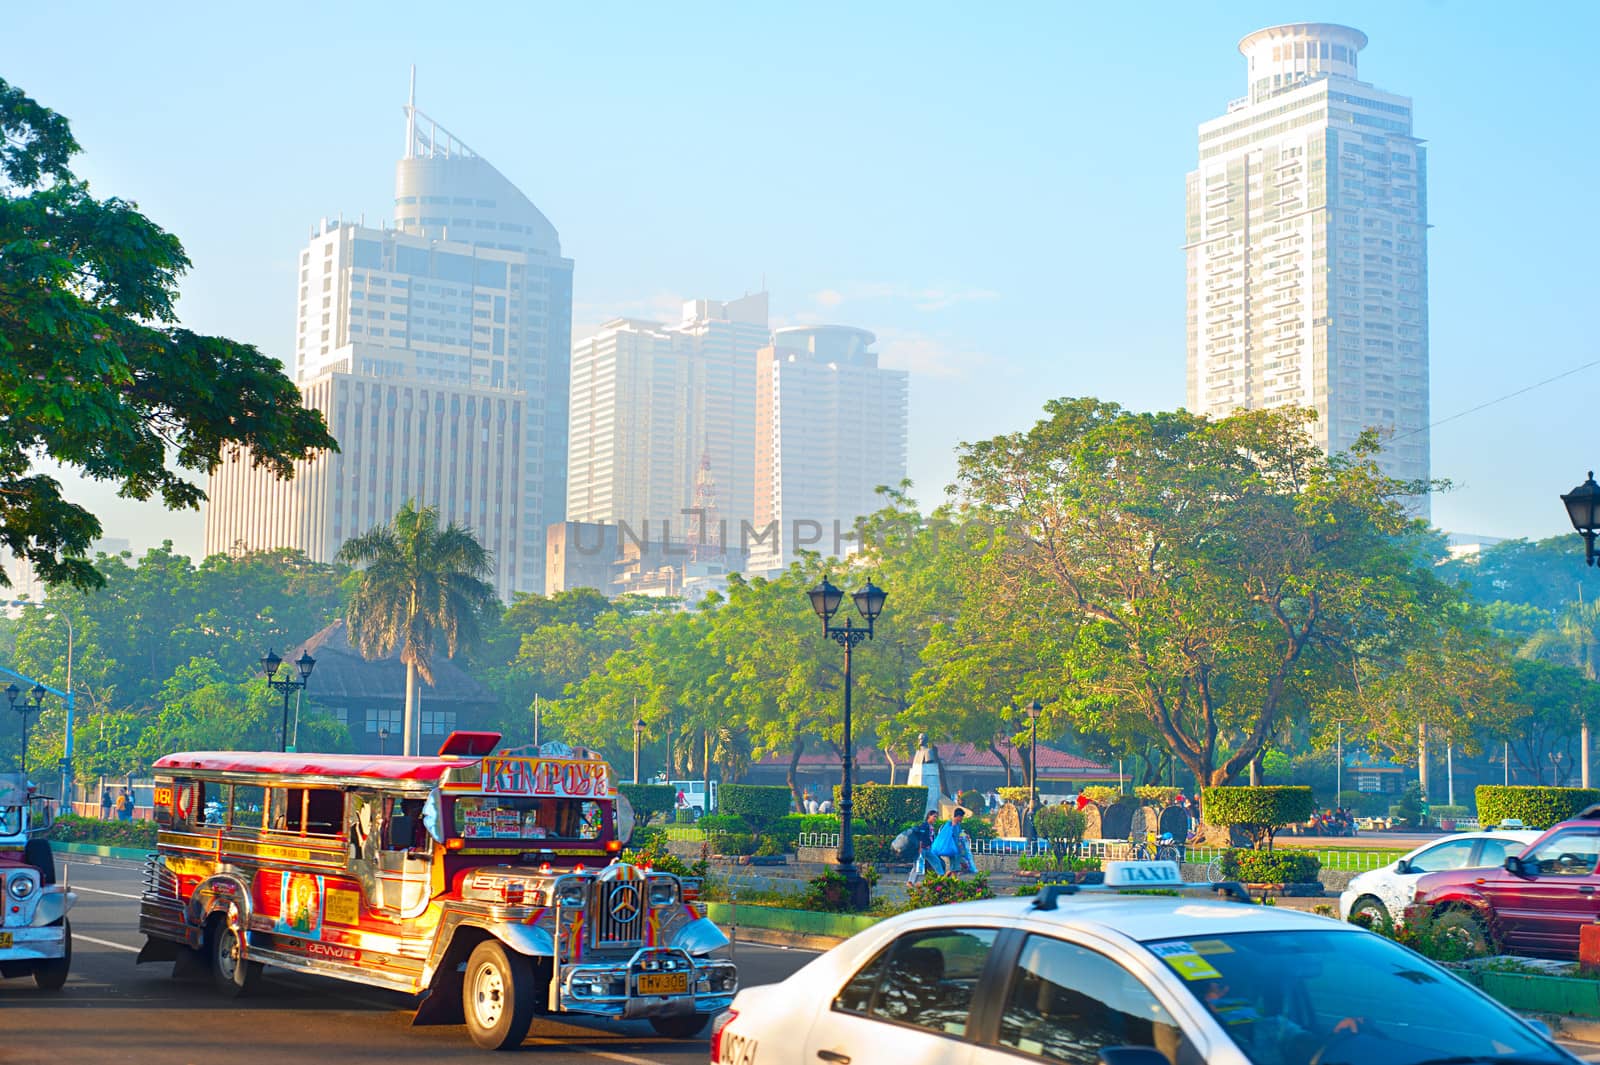 MANILA - APRIL 01, 2012: Morning traffic on the street in Manila, Philippines. Metro Manila is the most populous area in the Philippines with an estimated population of 16,300,000